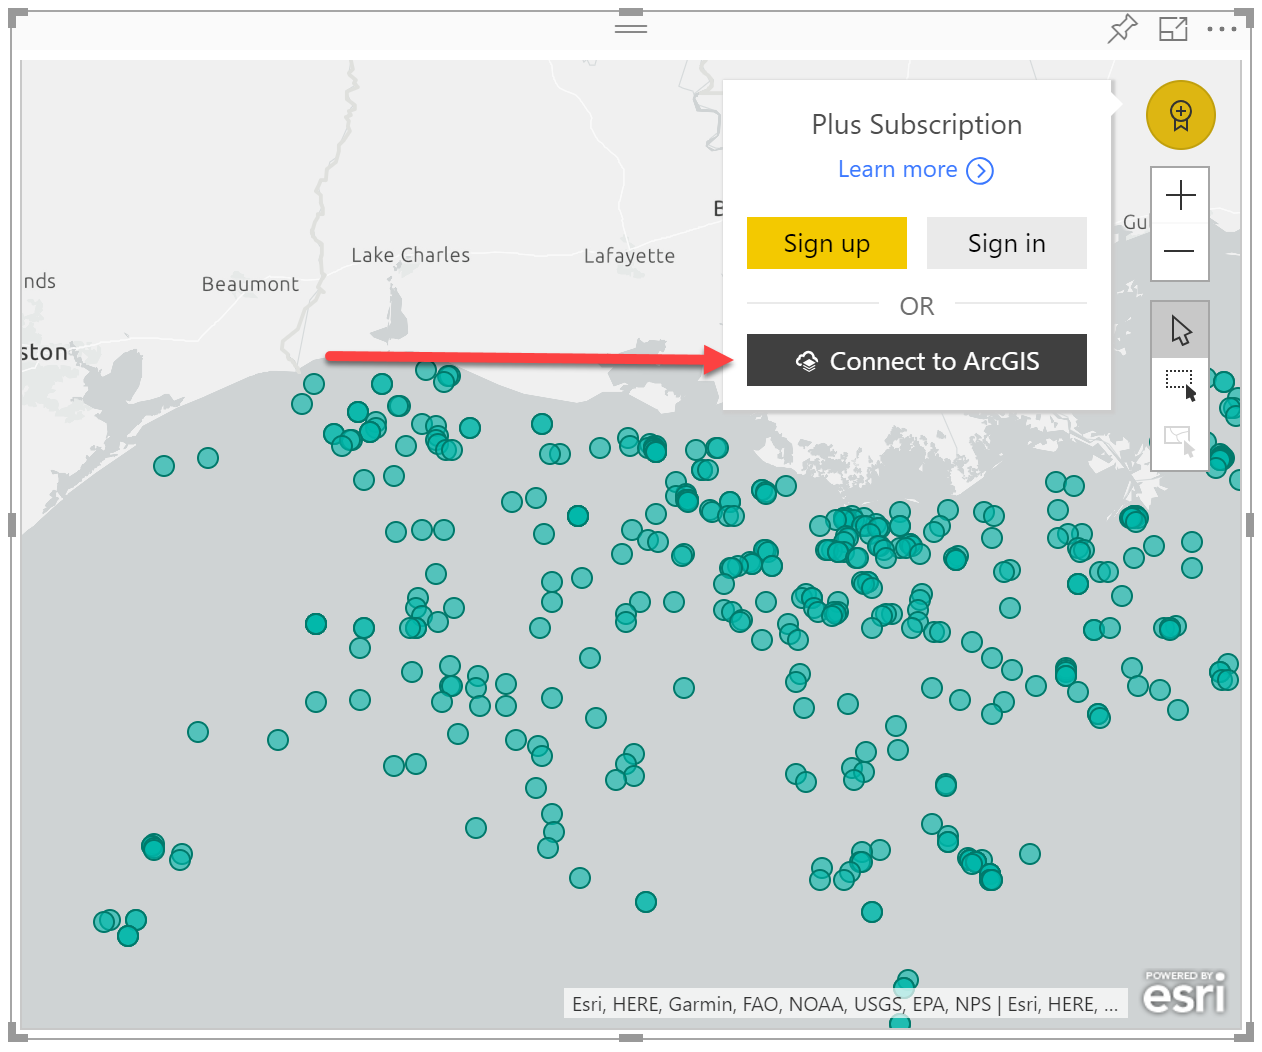 Esri Arcgis Online And Plus Subscription Organizational Purchase Are Now Available For Arcgis Maps For Power Bi Microsoft Power Bi Blog Microsoft Power Bi